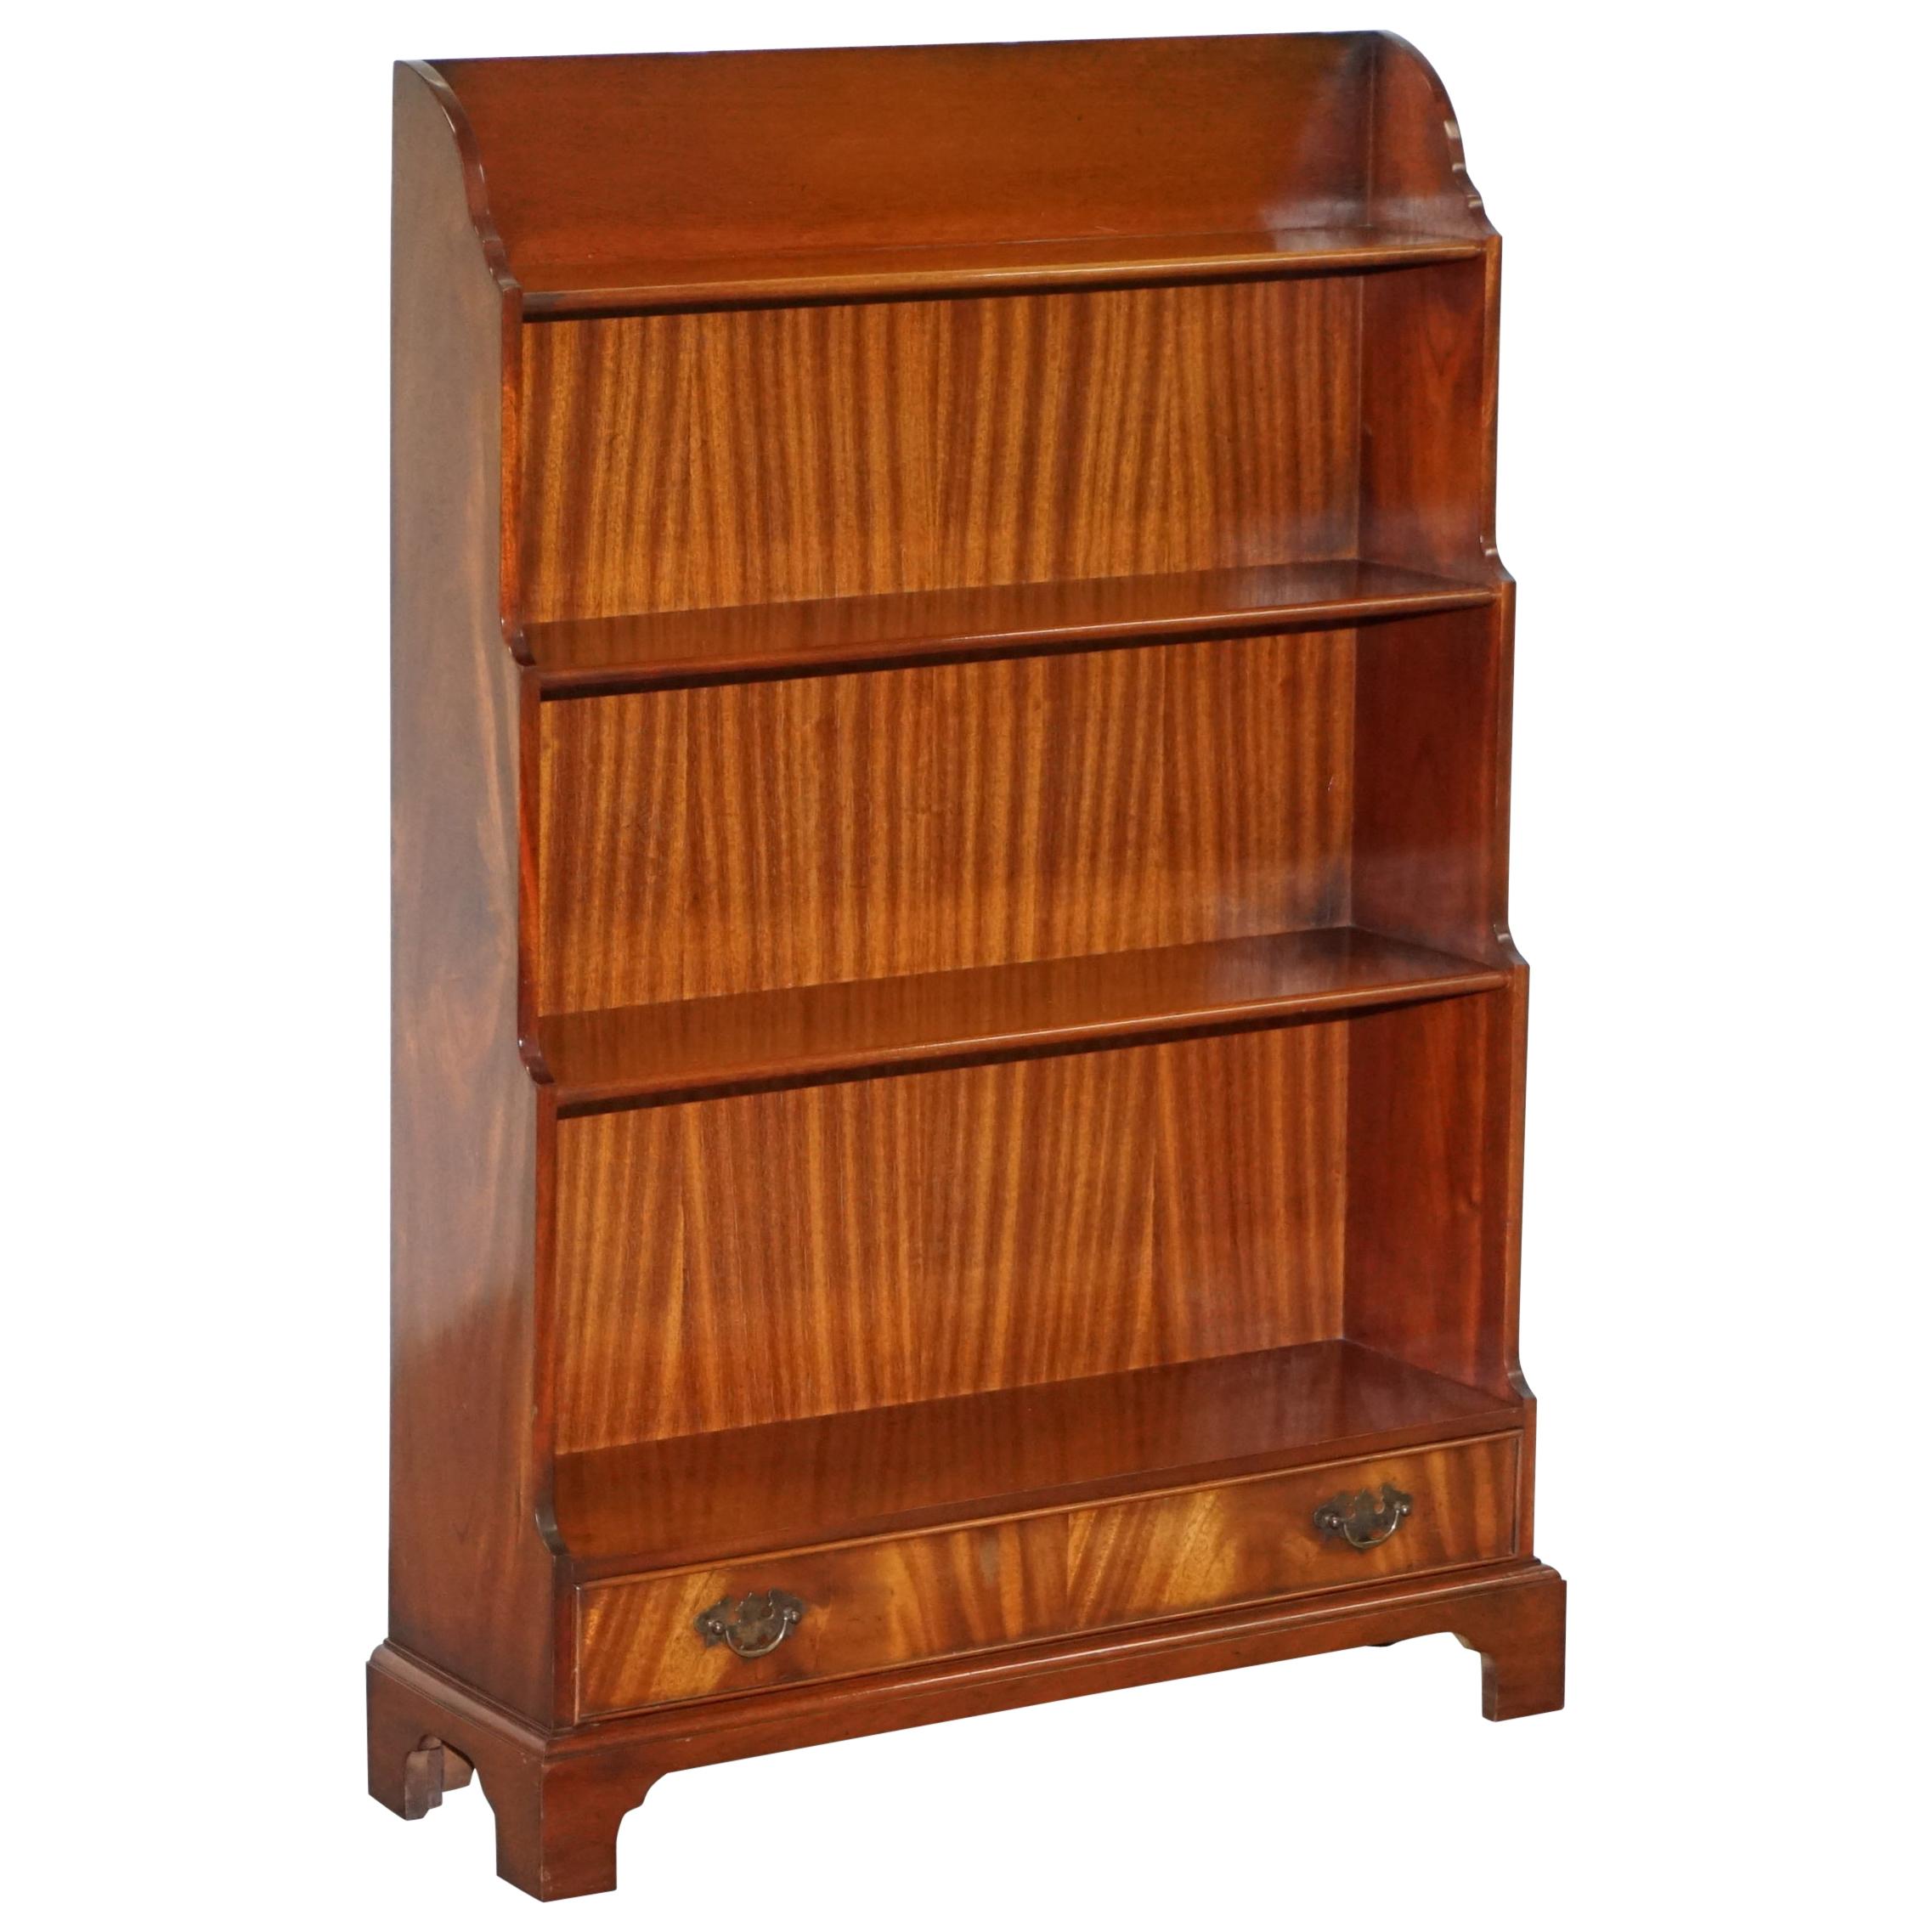 Stunning Charles Barr Flamed Hardwood Waterfall Bookcase After Gillows